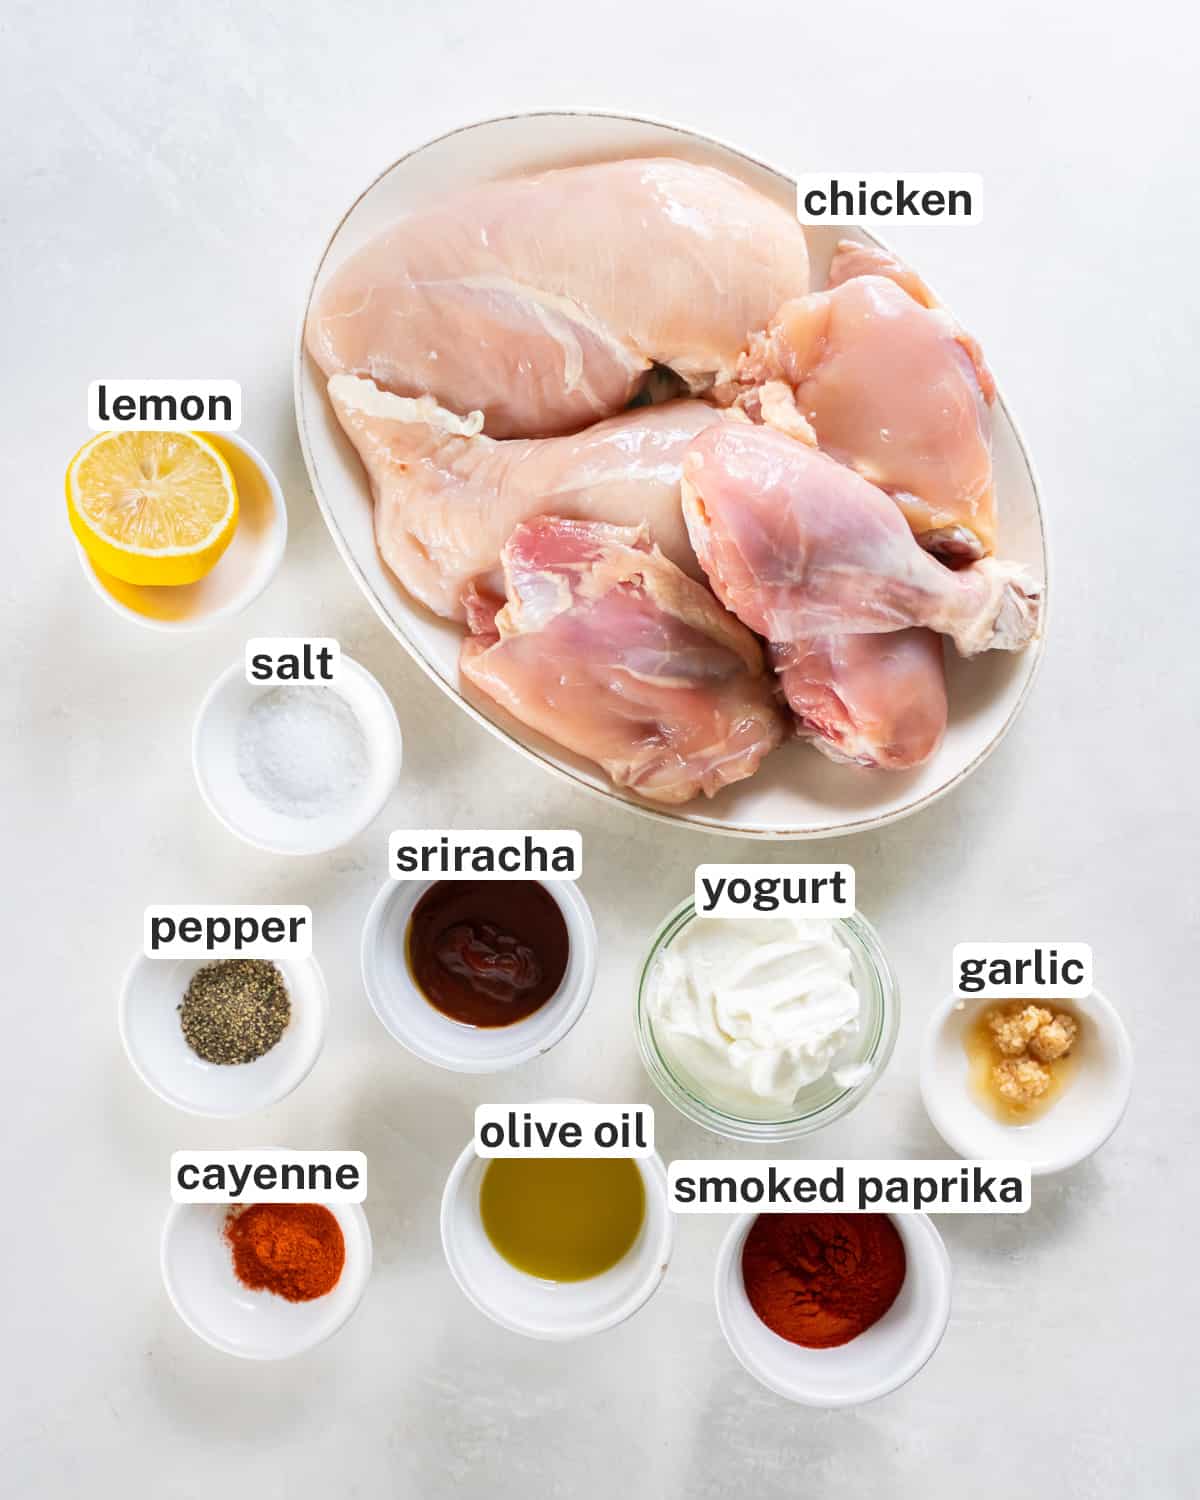 The ingredients for grilled paprika chicken with text.